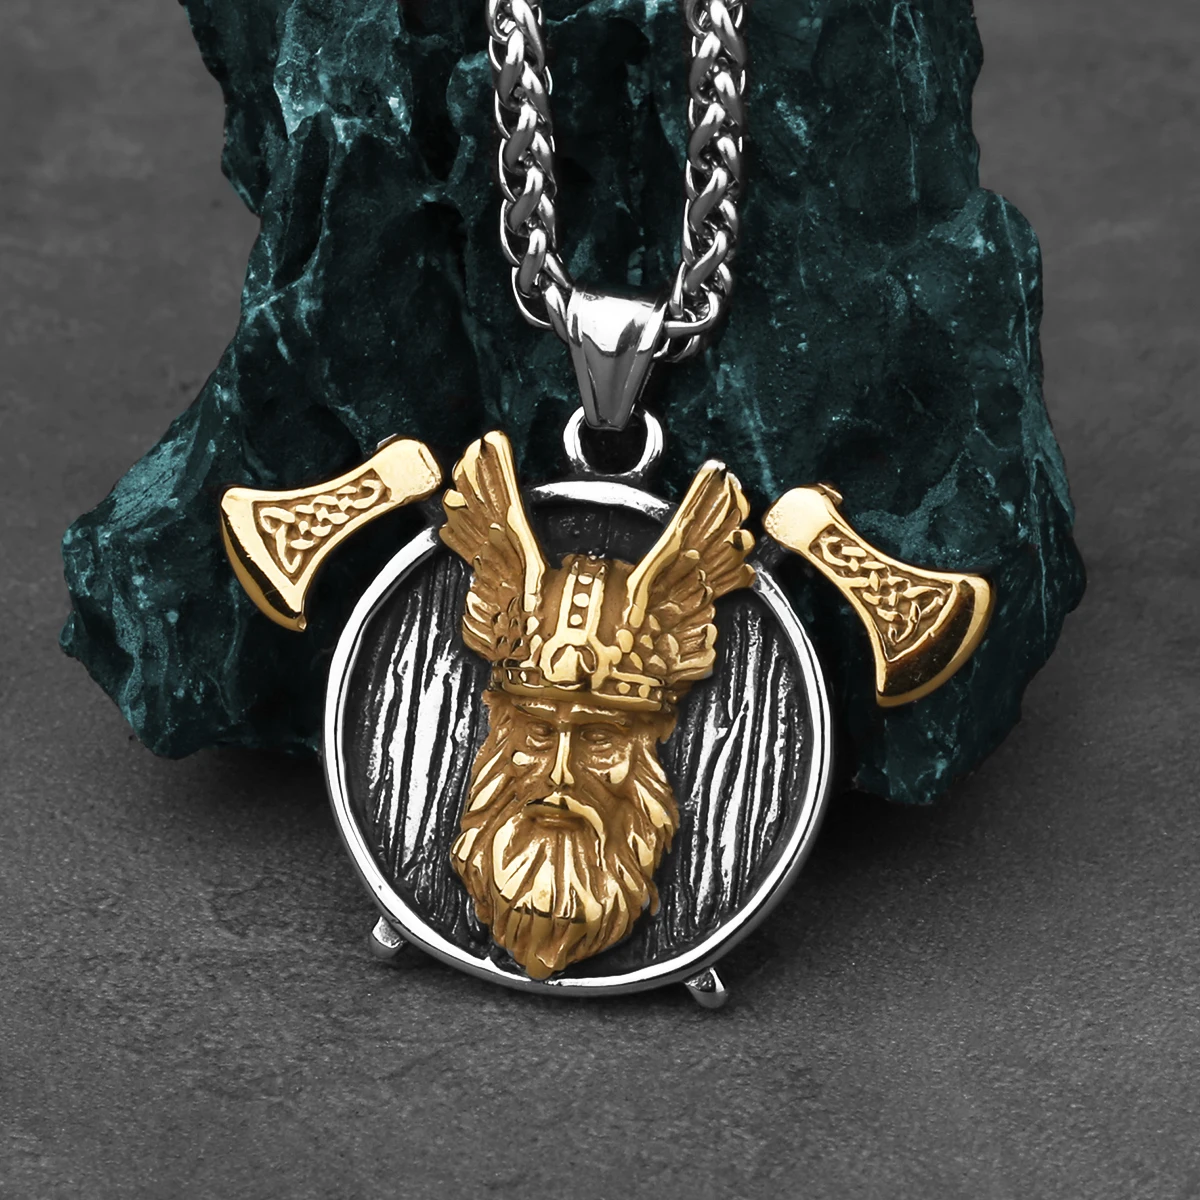 

Vintage Never Fade Inter Gold Odinga Two Axe Shield Necklace Men's Vikings Charm Stainless Steel Pendant Jewelry as Men Gift